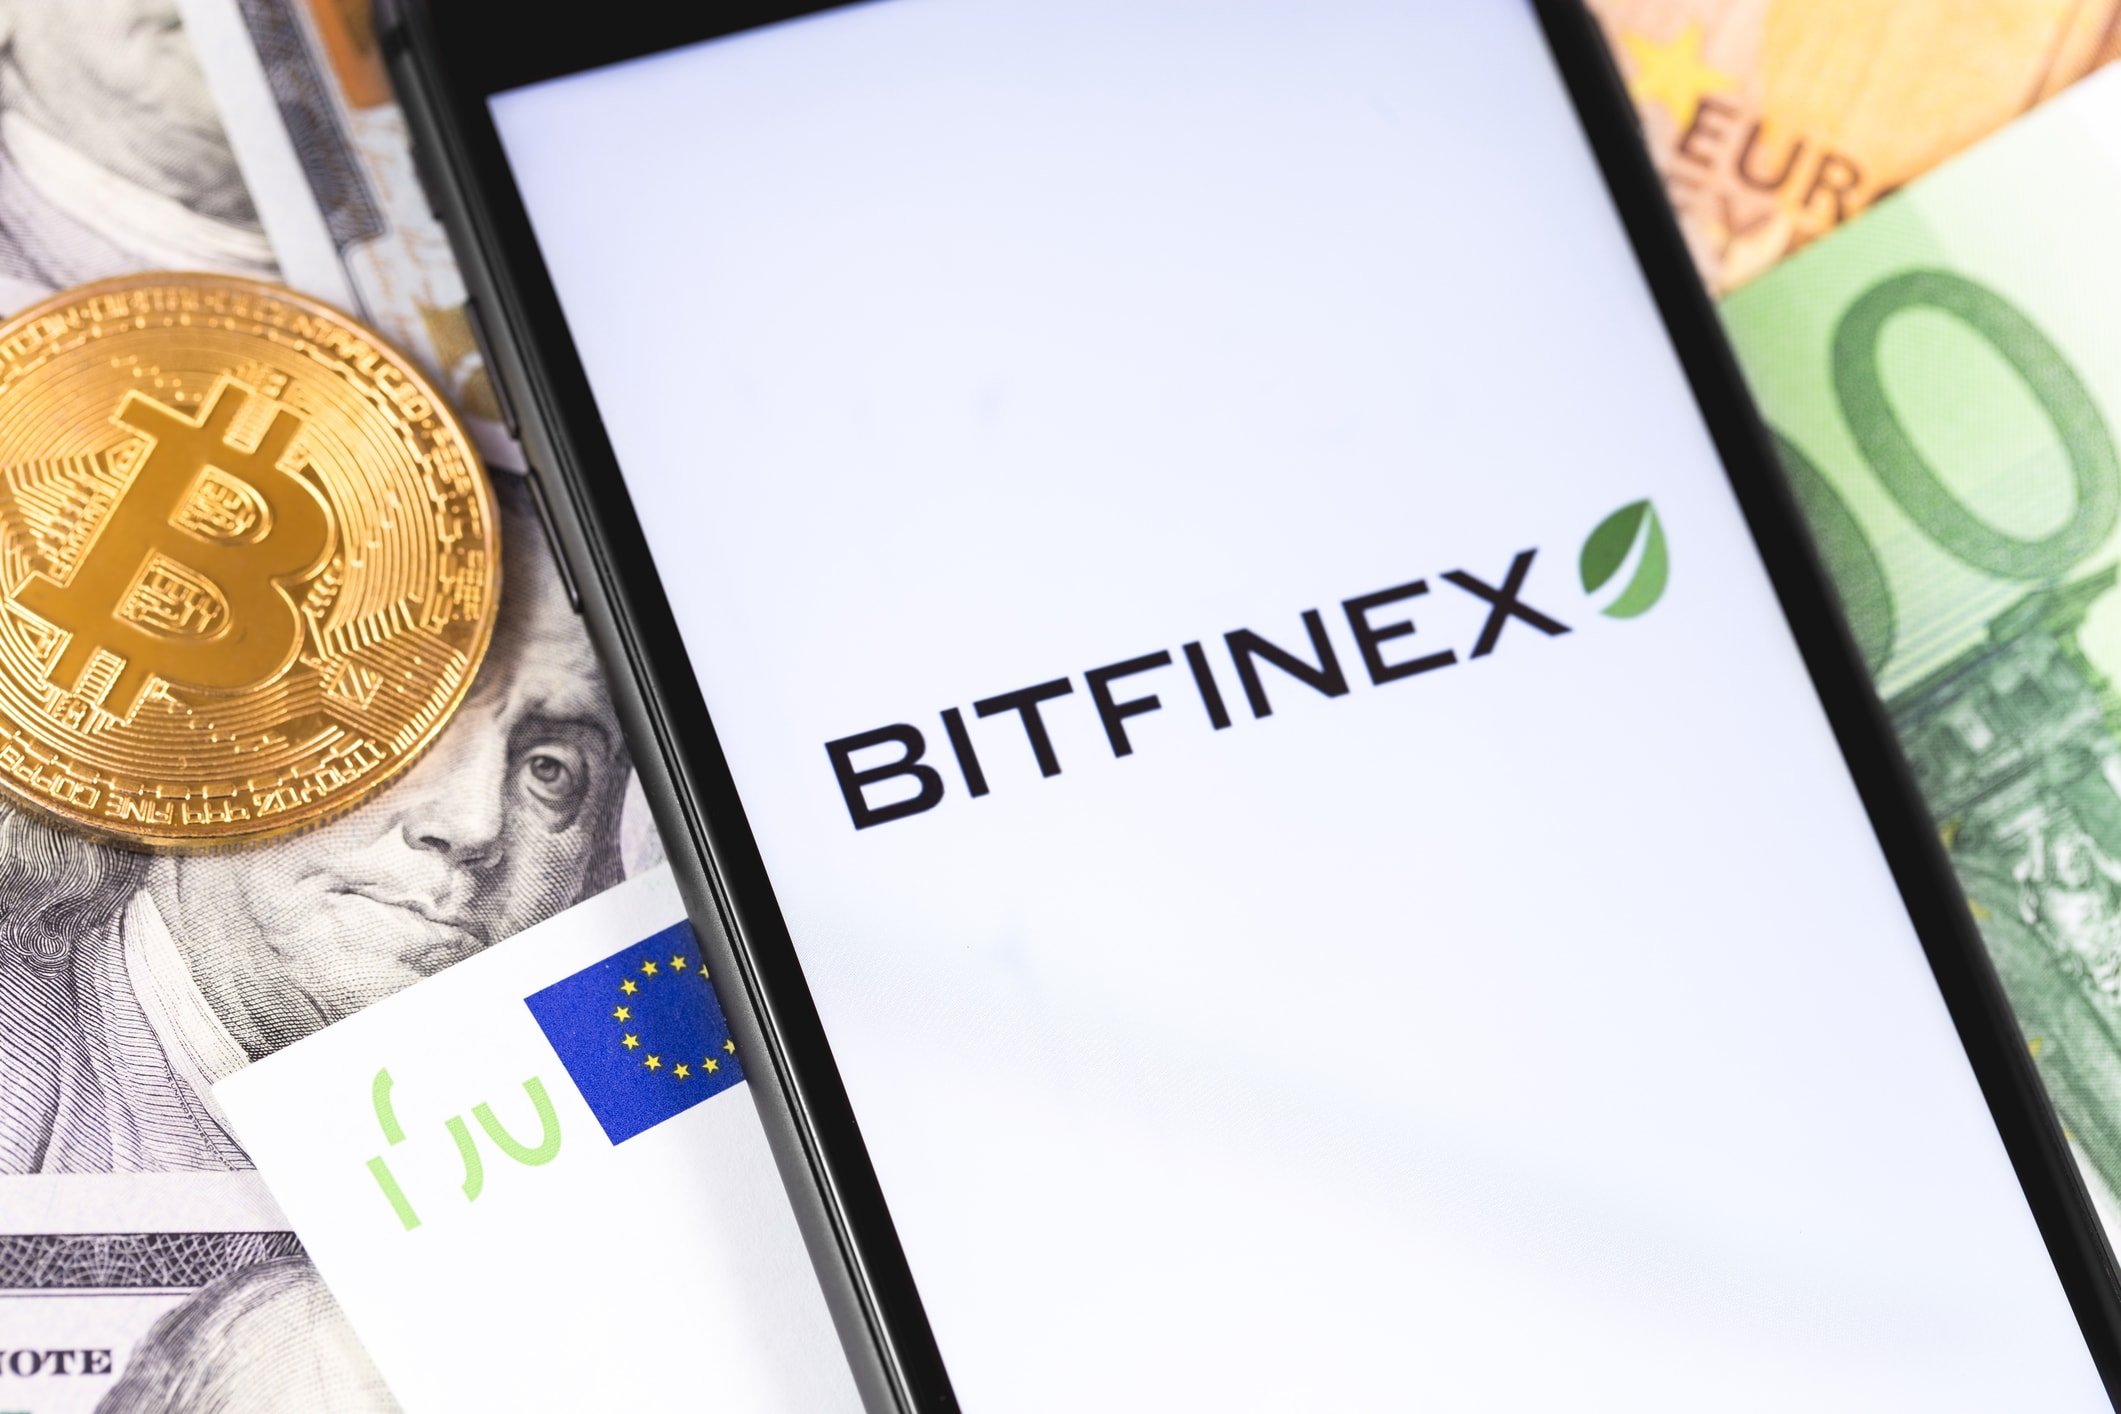 Coinmarketcap excludes Bitfinex from the bitcoin price